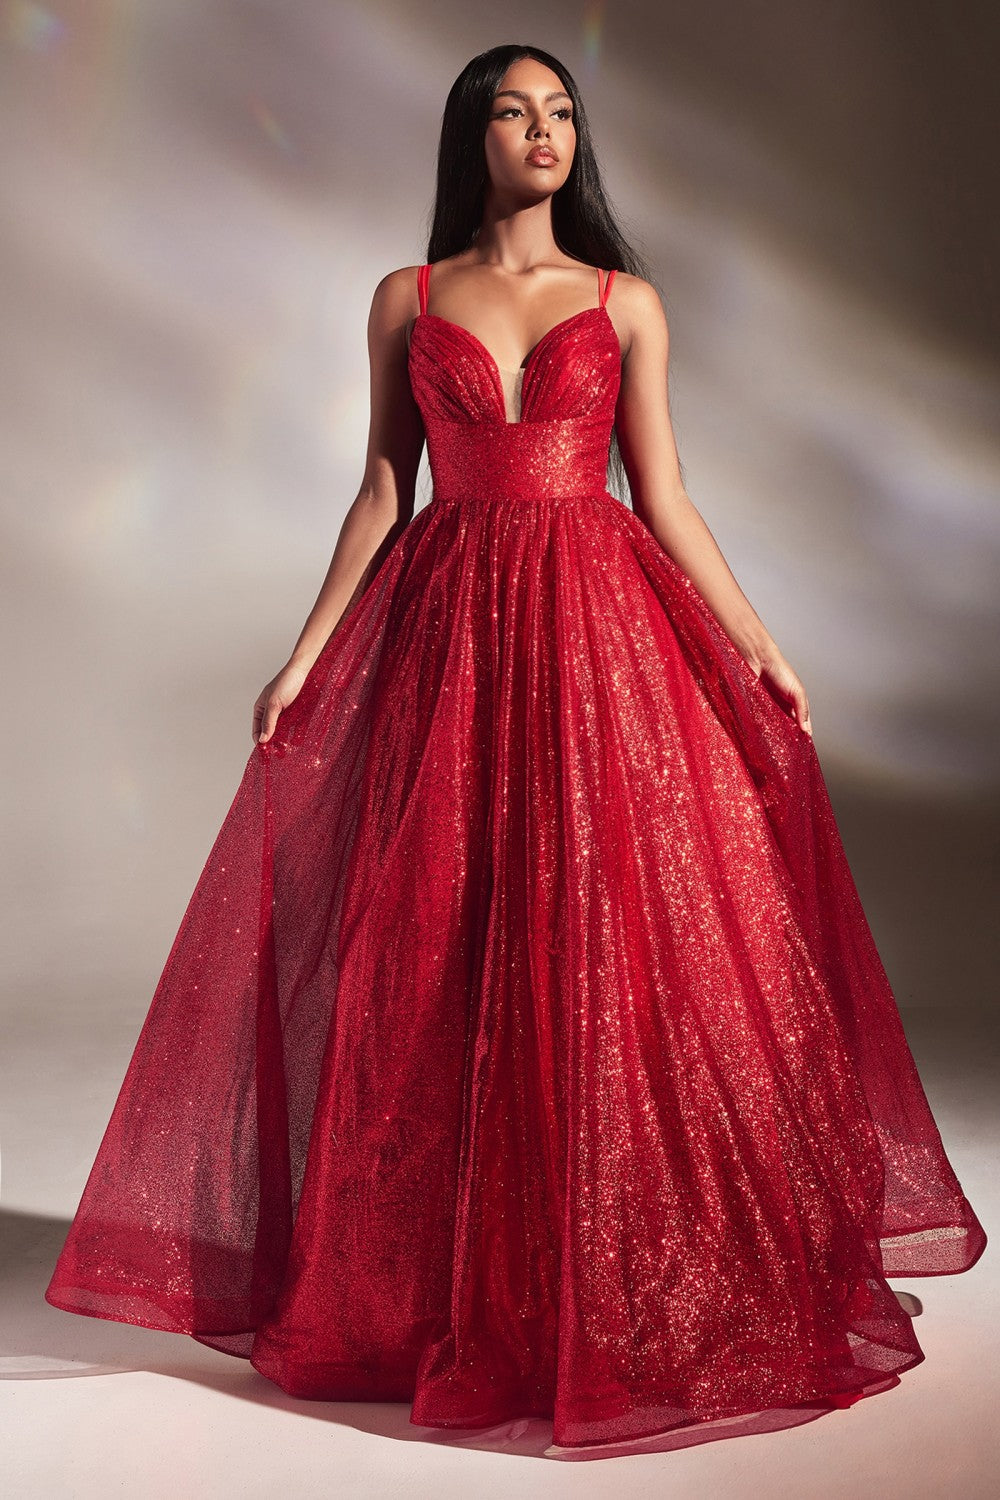 CD CD996 - Layered Glitter A-Line Ball Gown with V-Neck & Corset Back PROM GOWN Cinderella Divine 2 RED 